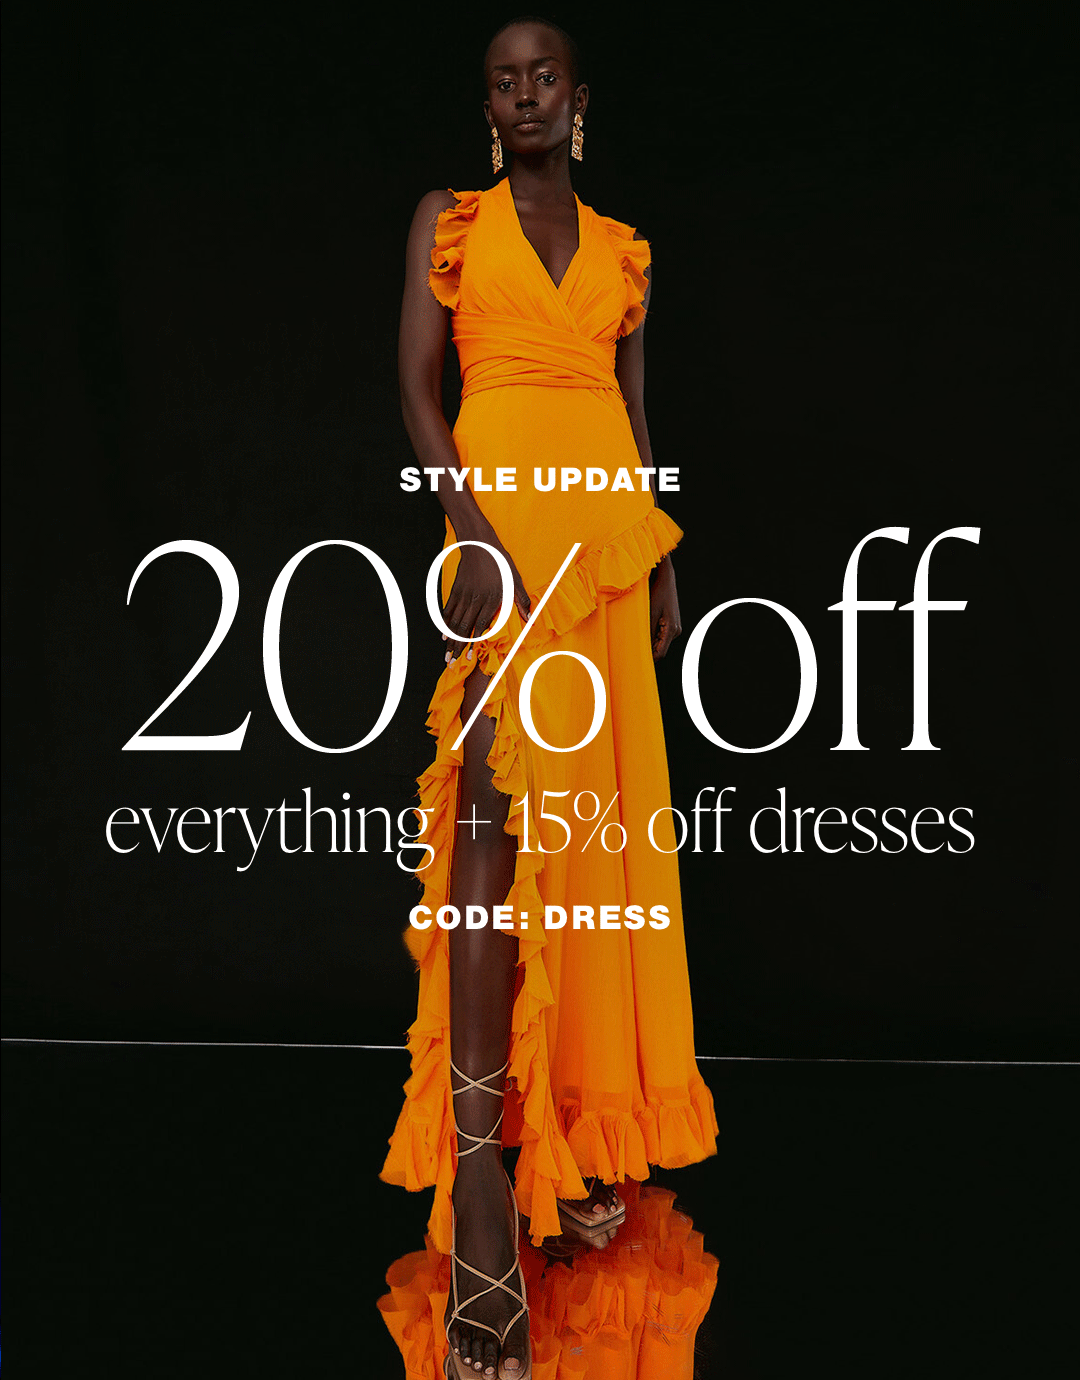 Style Update 20% off everything + 15% off dresses code: DRESS